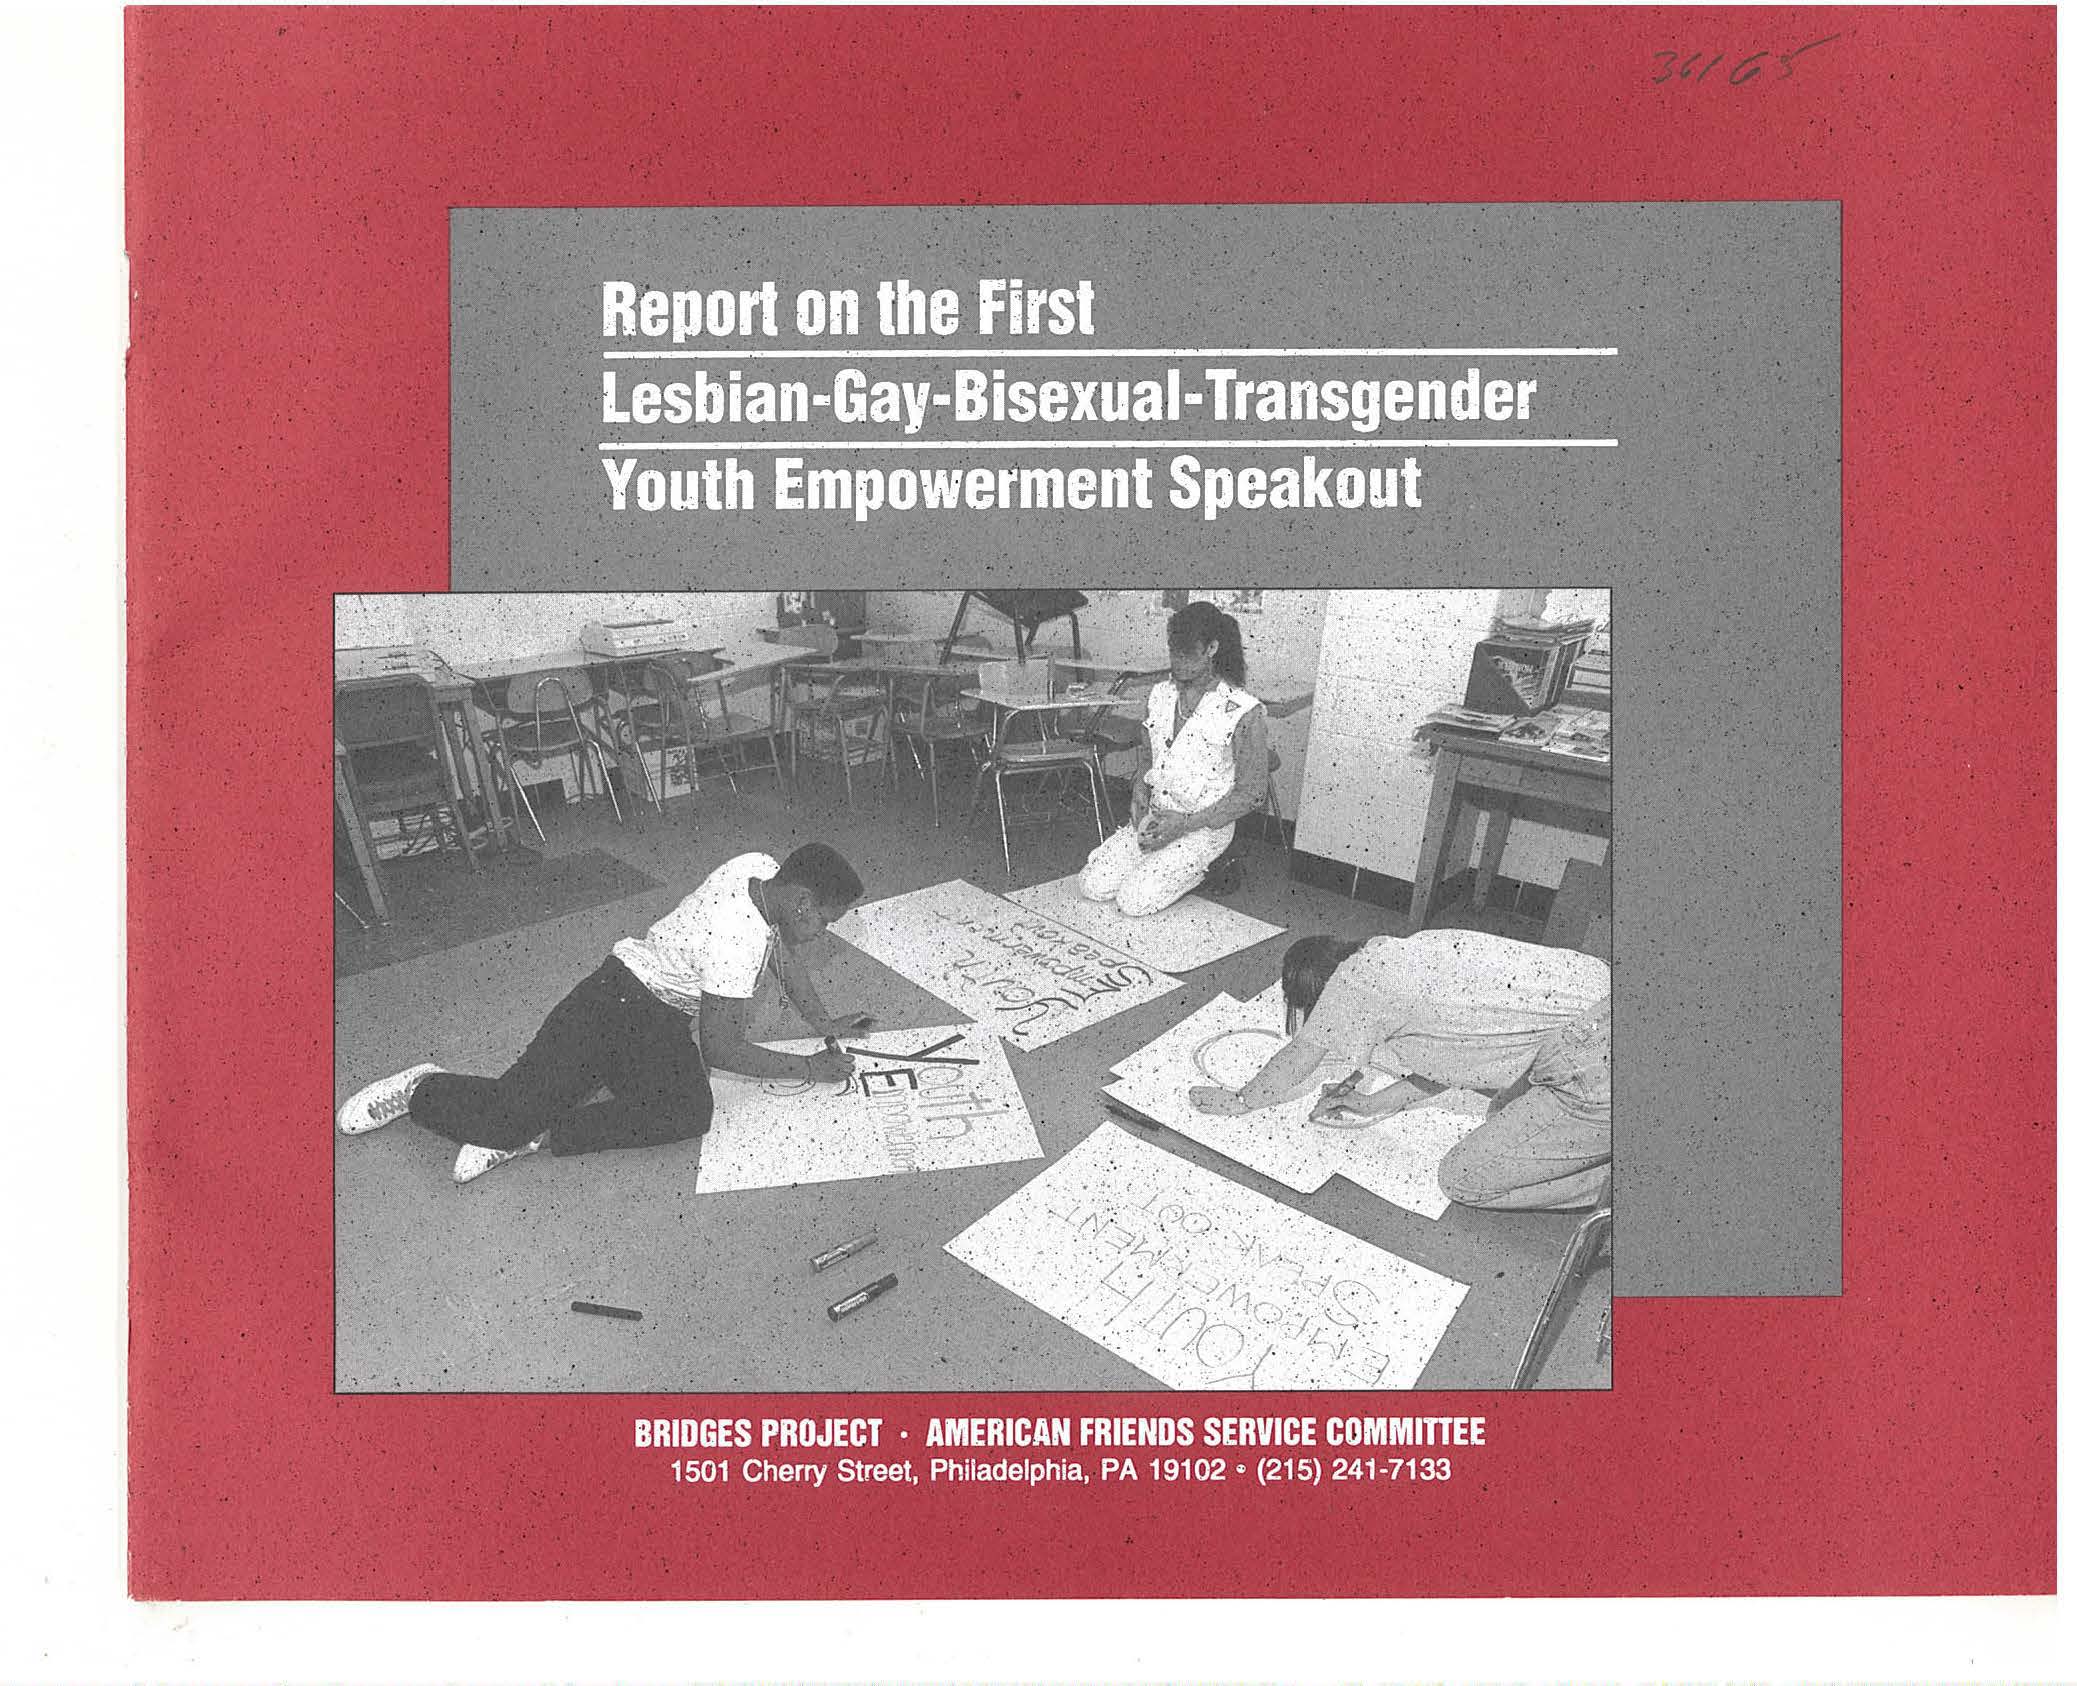 Report on the First LGBT Youth Empowerment Speakout